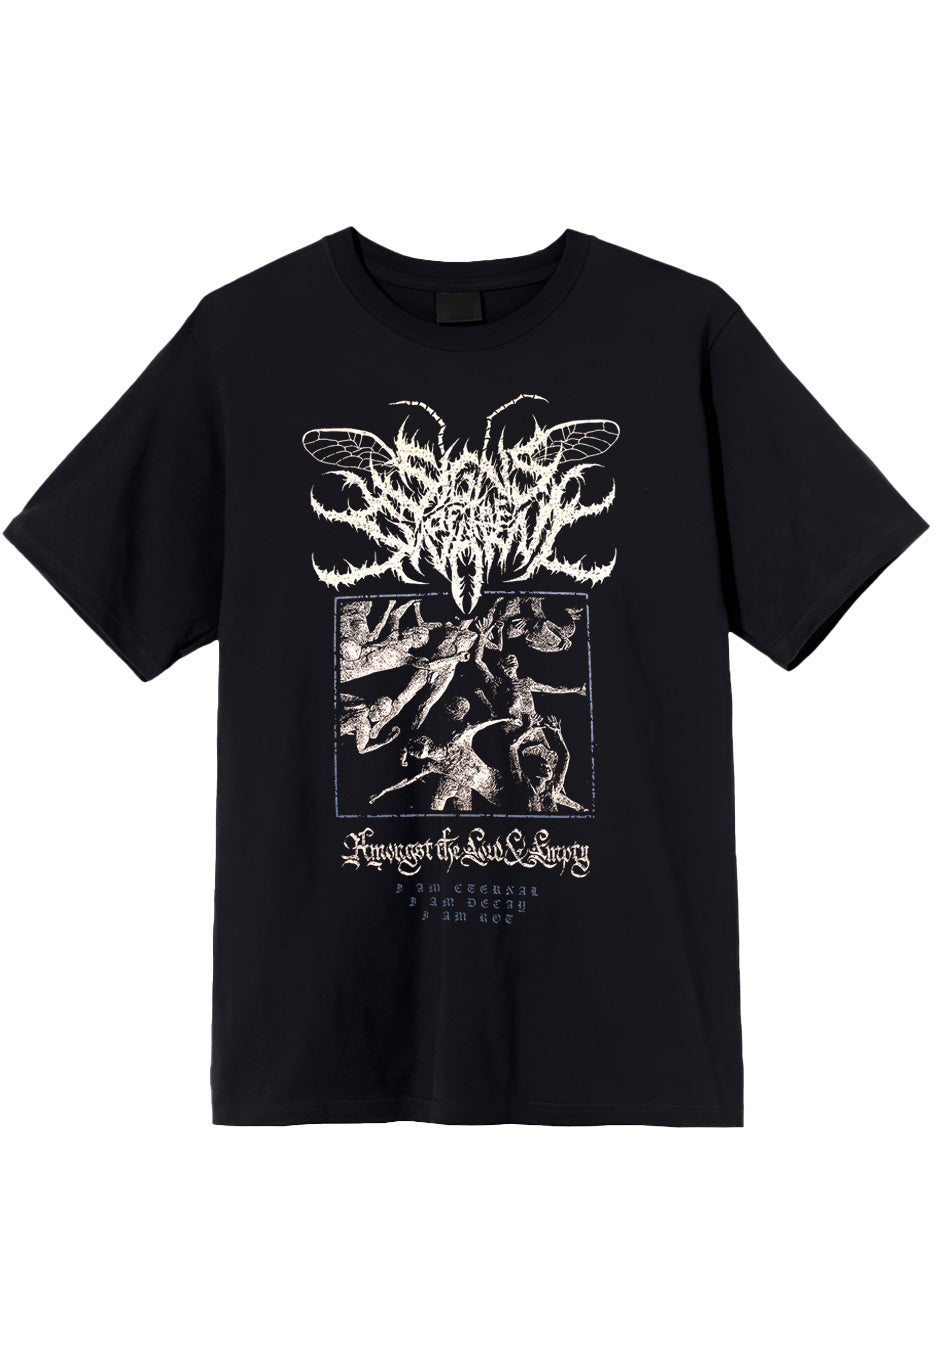 Signs Of The Swarm - Hoagland - T-Shirt